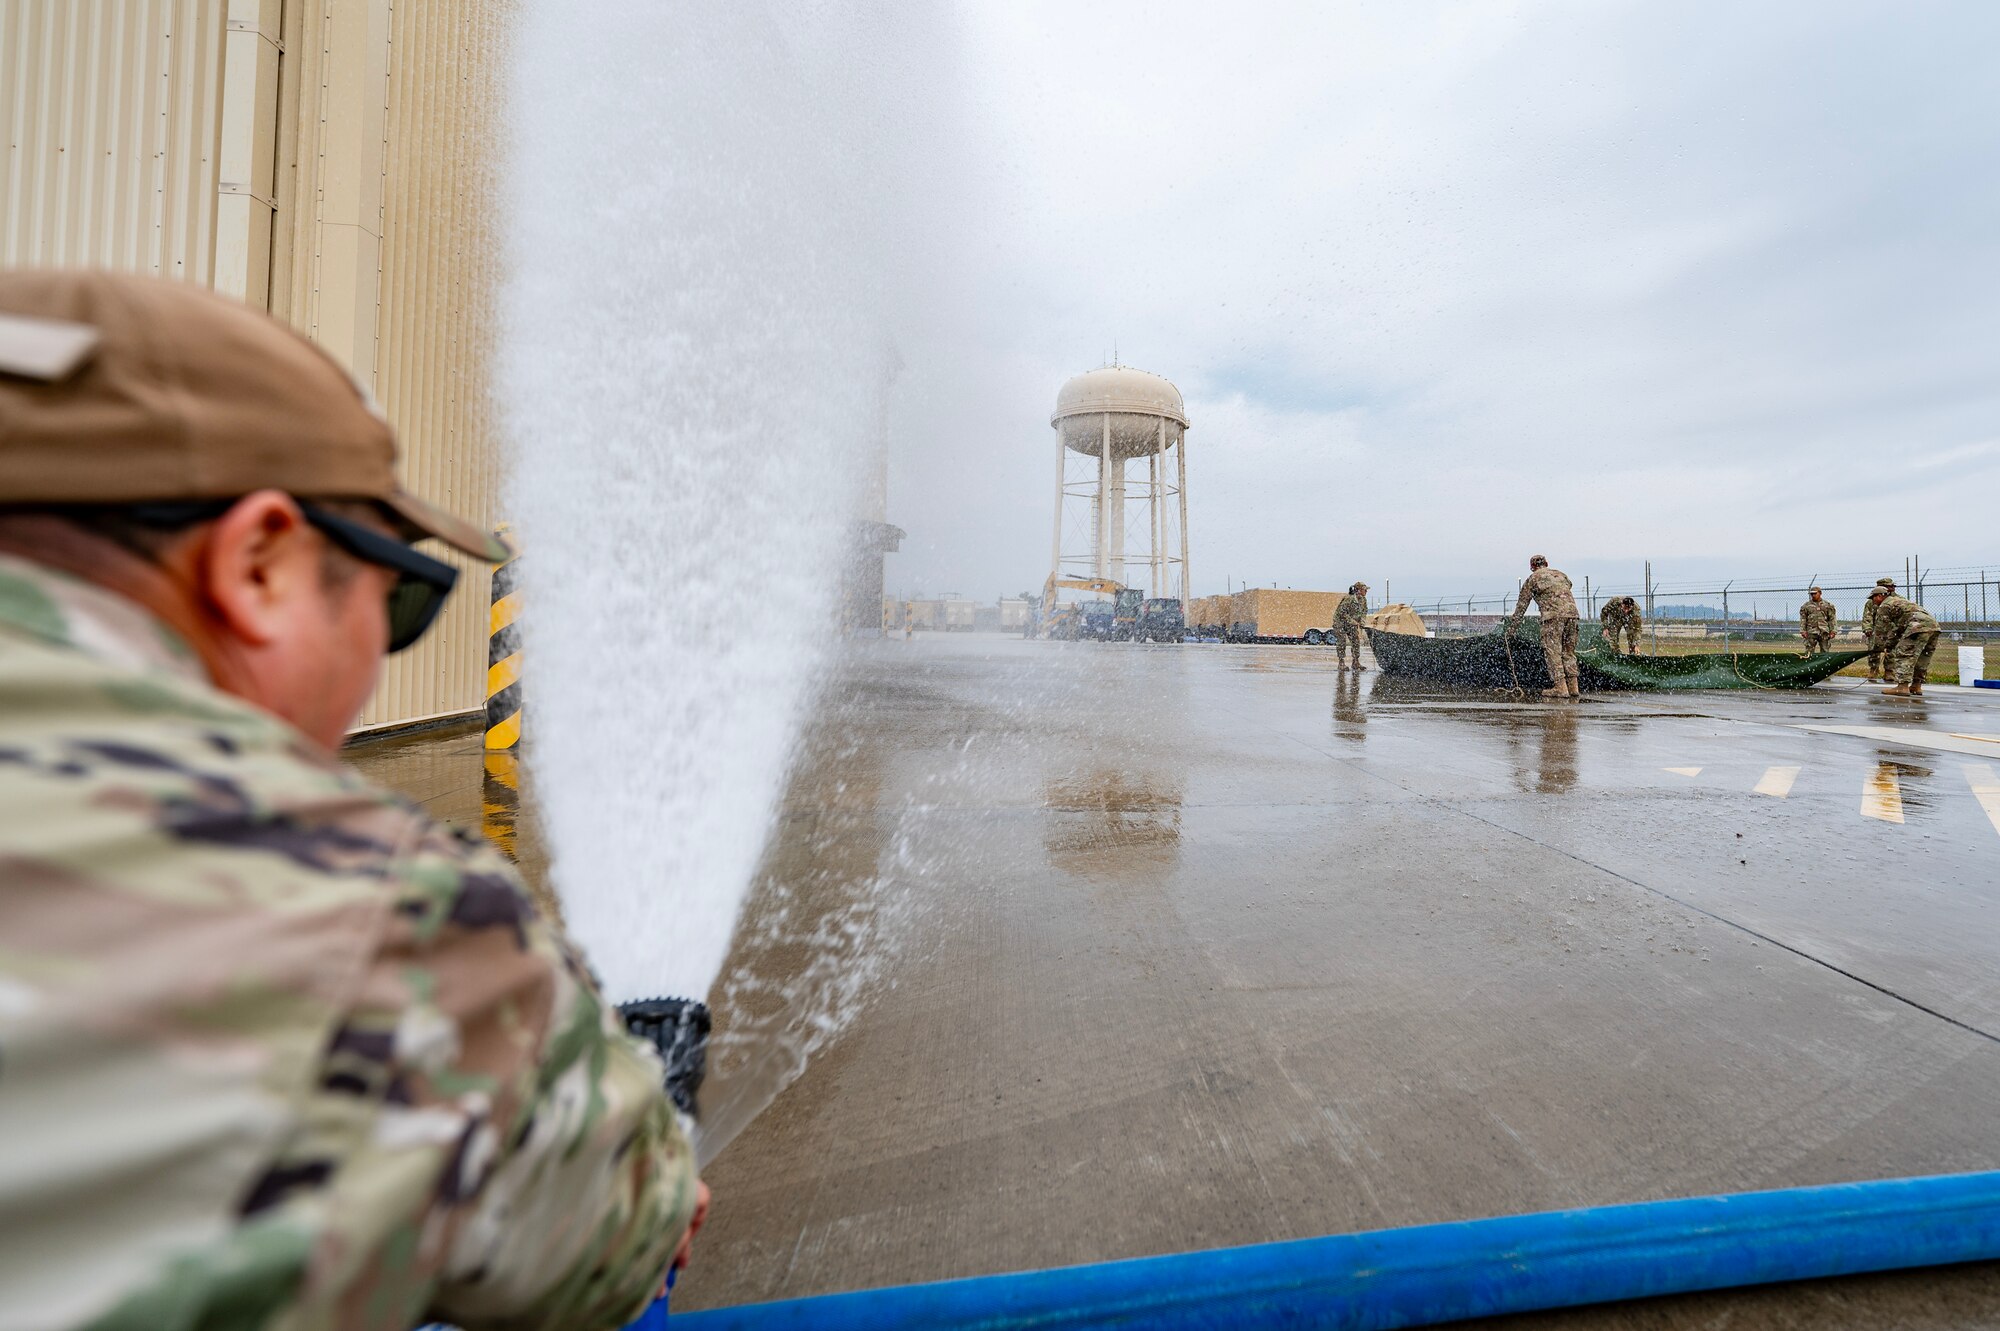 Airman sprays water to simulate a storm during a Prime Base Engineer Emergency Force or “Prime BEEF” training at Kunsan Air Base.